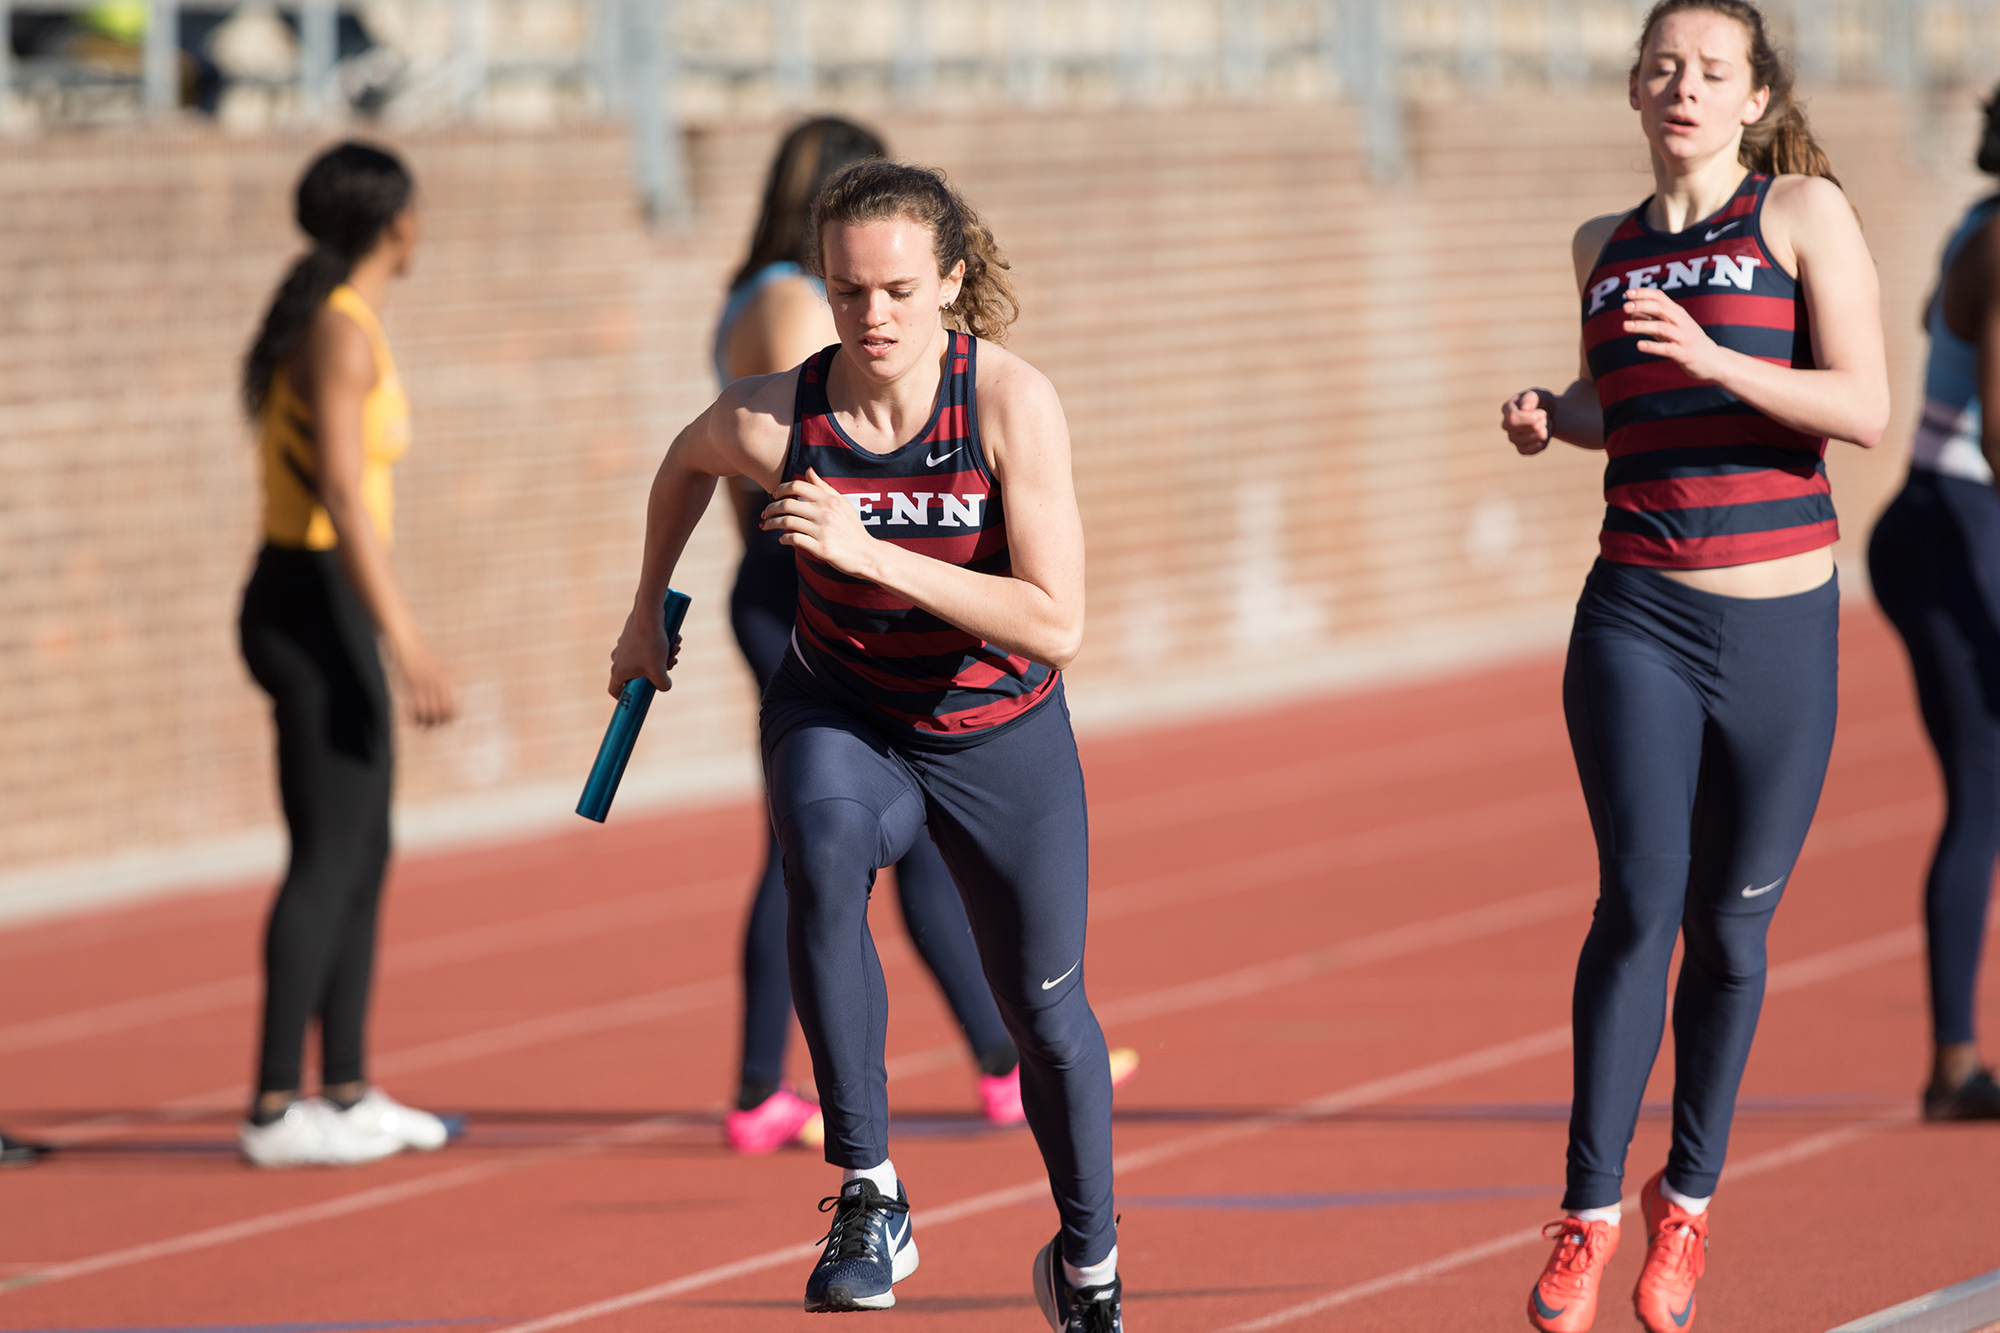 Penn Women's Track and Field